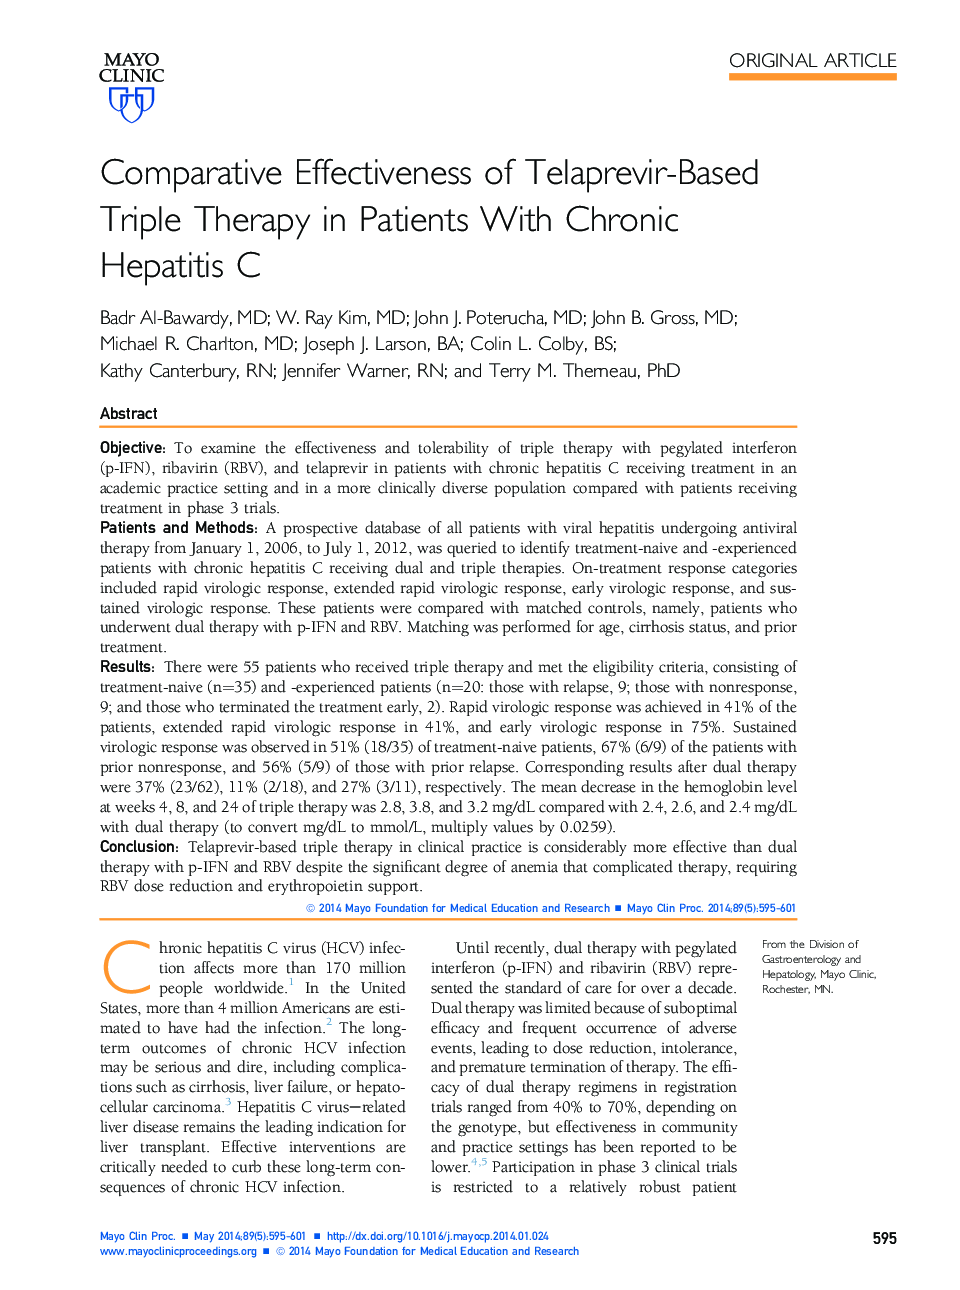 Comparative Effectiveness of Telaprevir-Based Triple Therapy in Patients With Chronic Hepatitis C